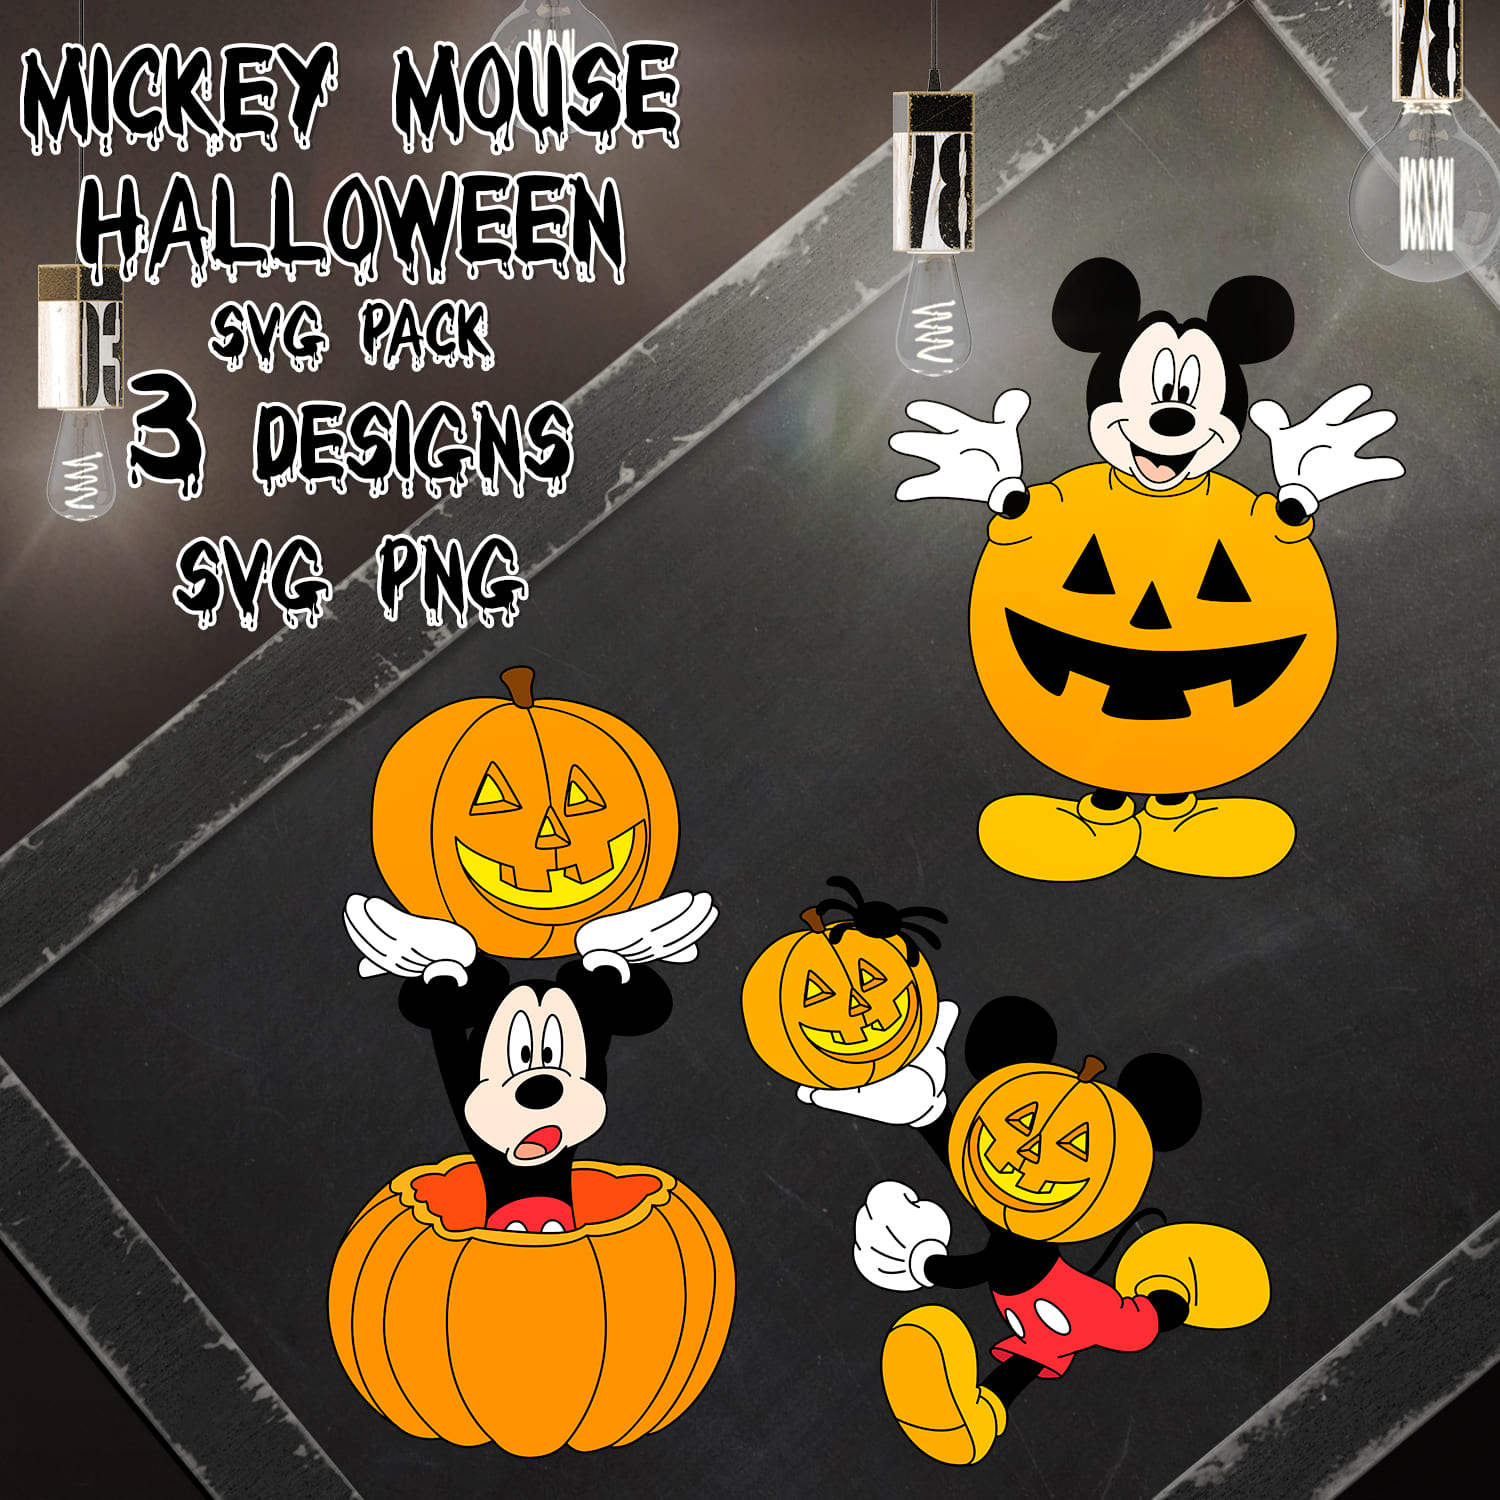 Mickey Mouse Halloween SVG - main image preview.